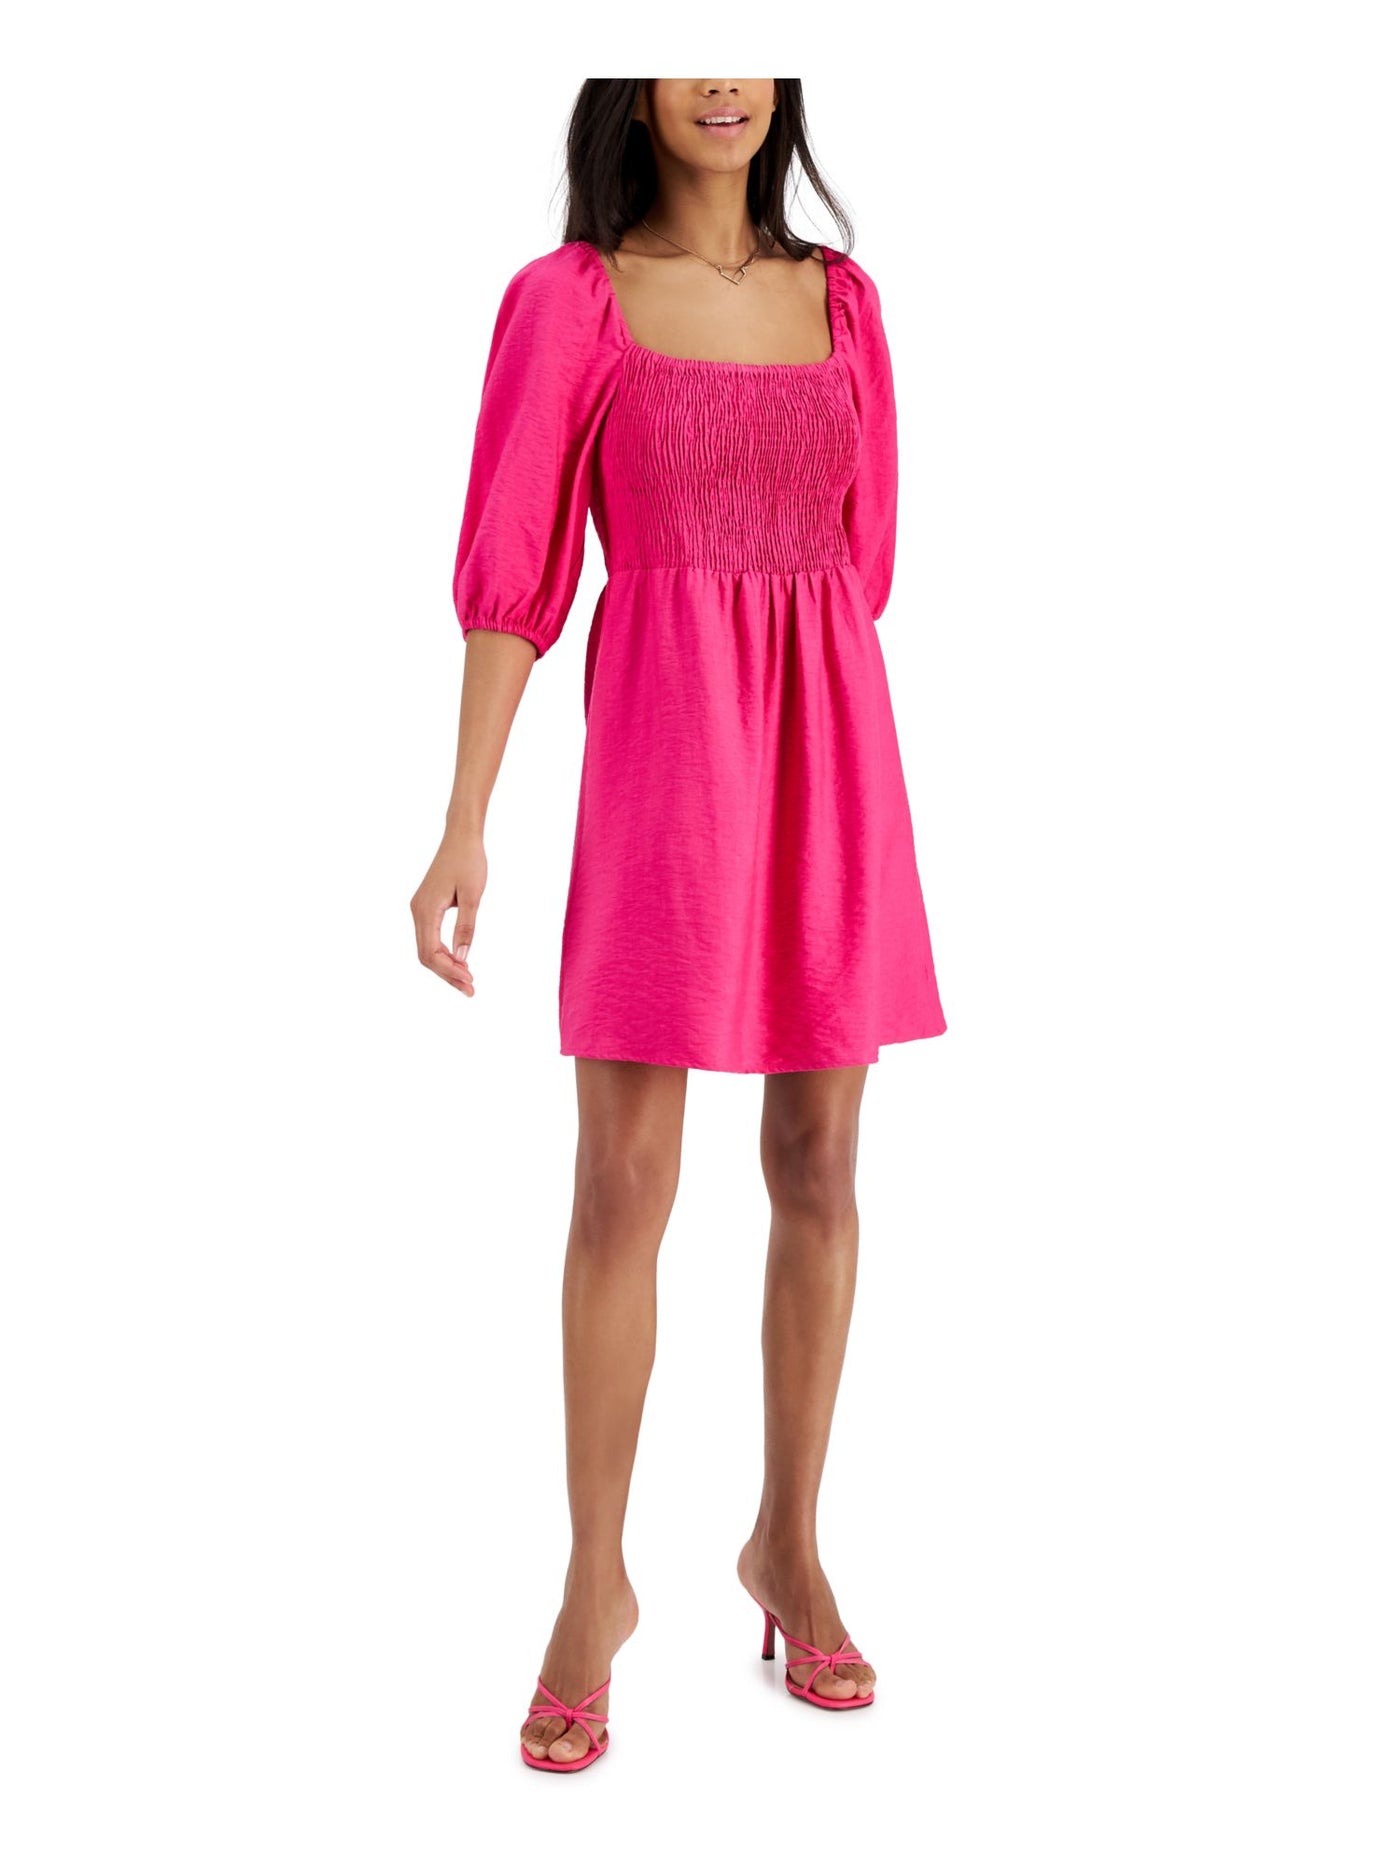 BAR III DRESSES Womens Pink Smocked Textured Lined Elastic Cuffs Pouf Sleeve Square Neck Above The Knee Fit + Flare Dress L